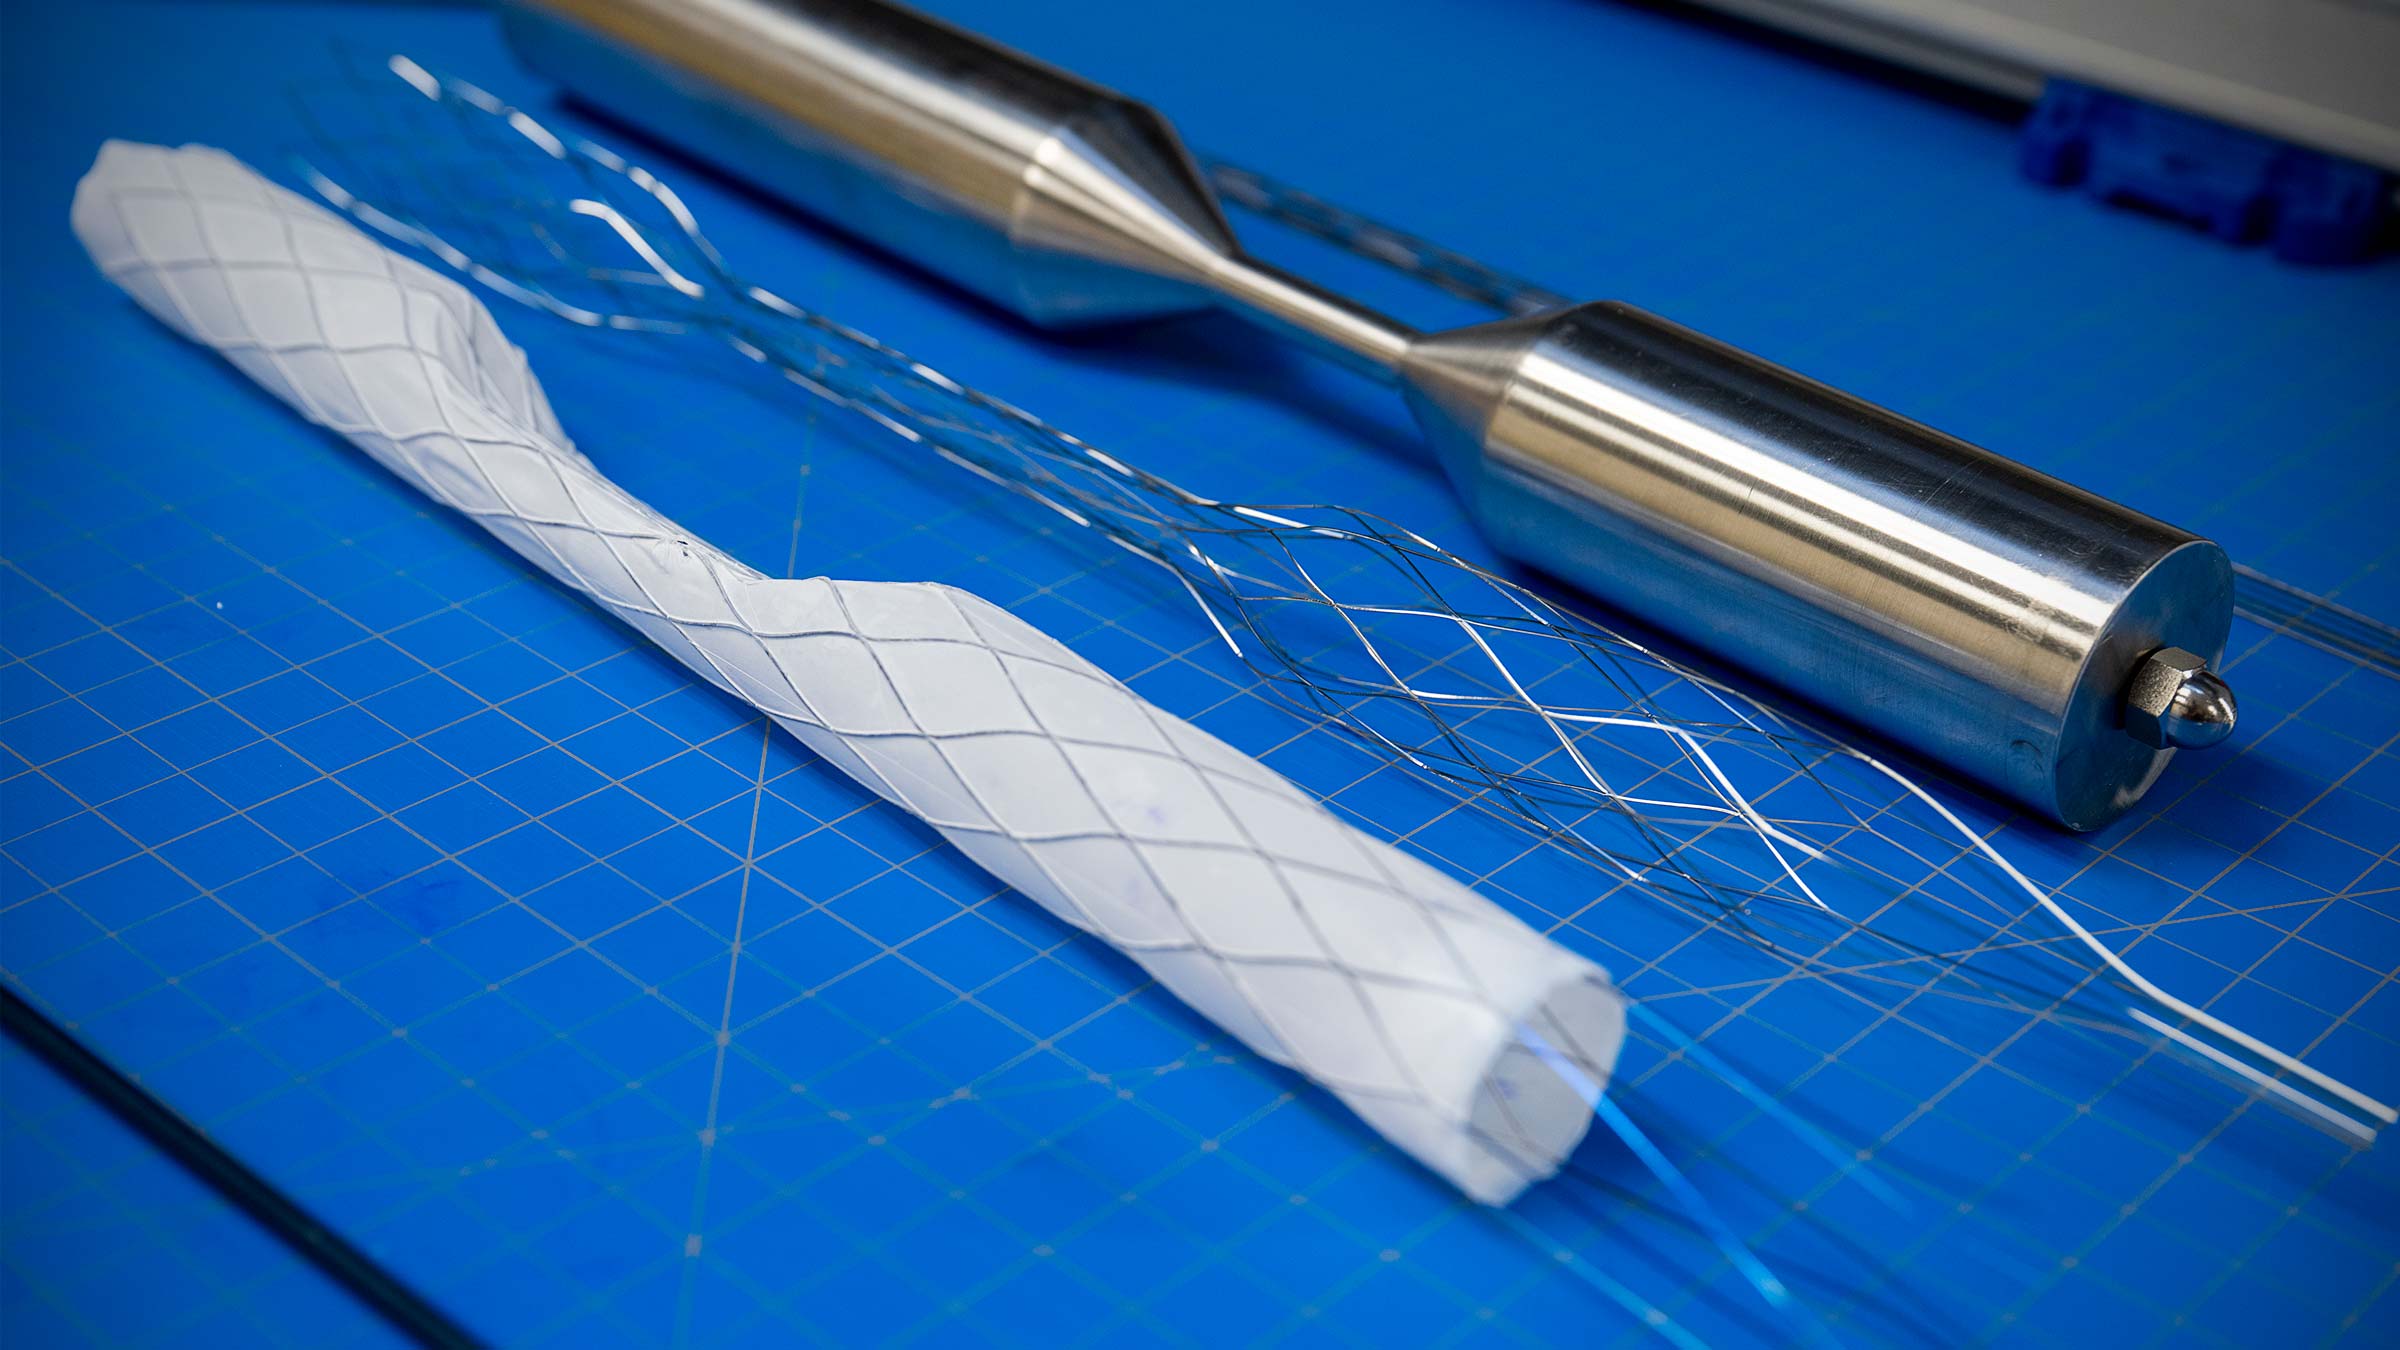 Dr. Tillman altered his original stent design to a dumbbell shape that would allow for continuous flow to organs, potentially keeping more organs viable for donation.